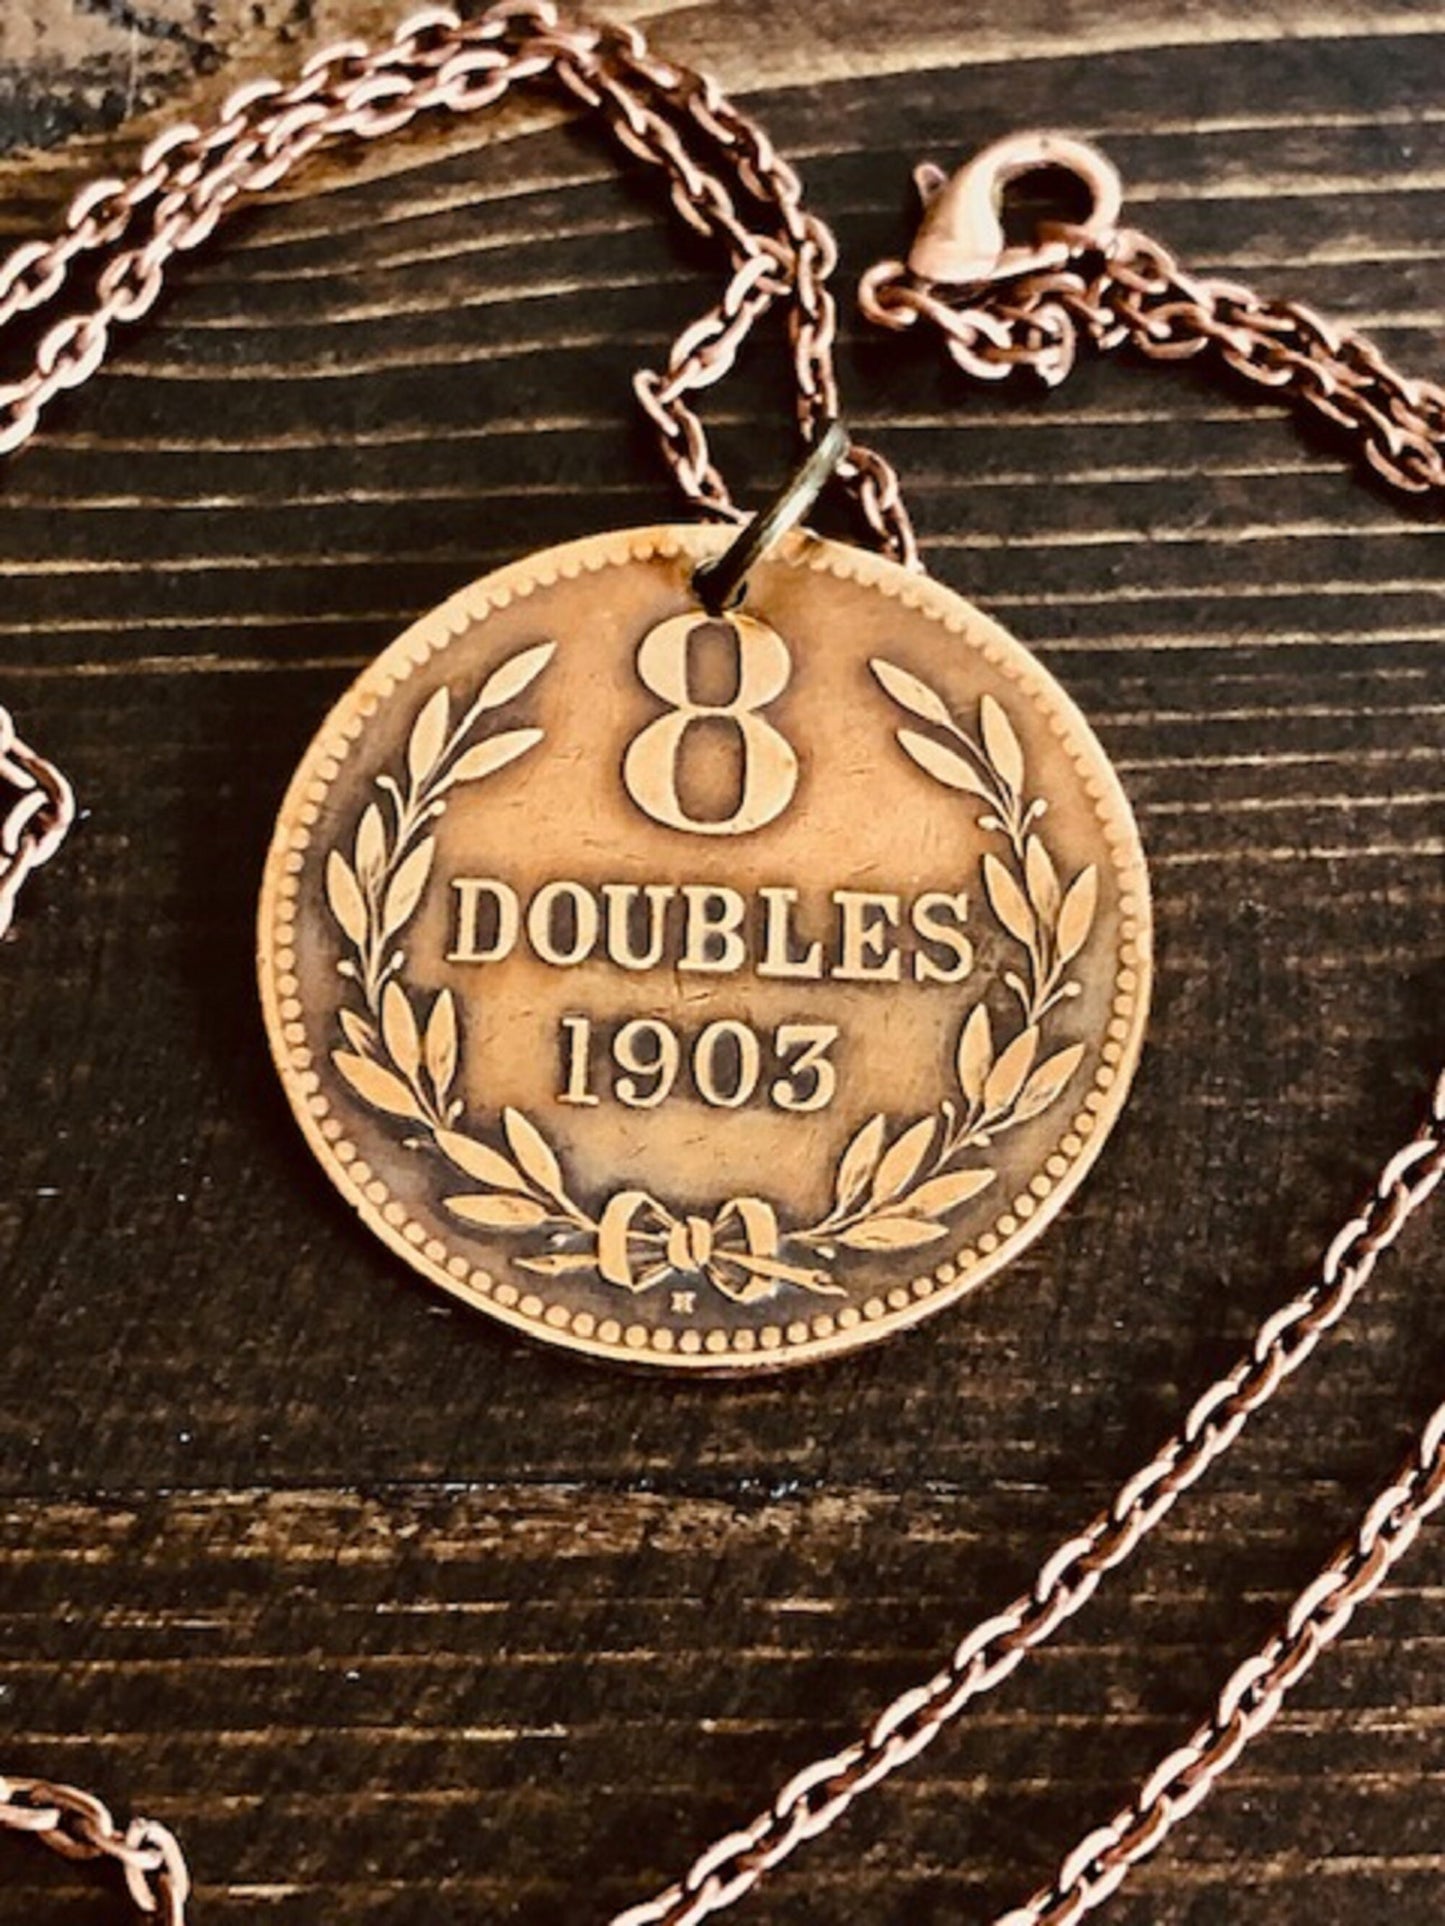 Guernesey Coin Necklace Pendant 8 Doubles Vintage Personal Old Vintage Handmade Jewelry Gift Friend Charm For Him Her World Coin Collector